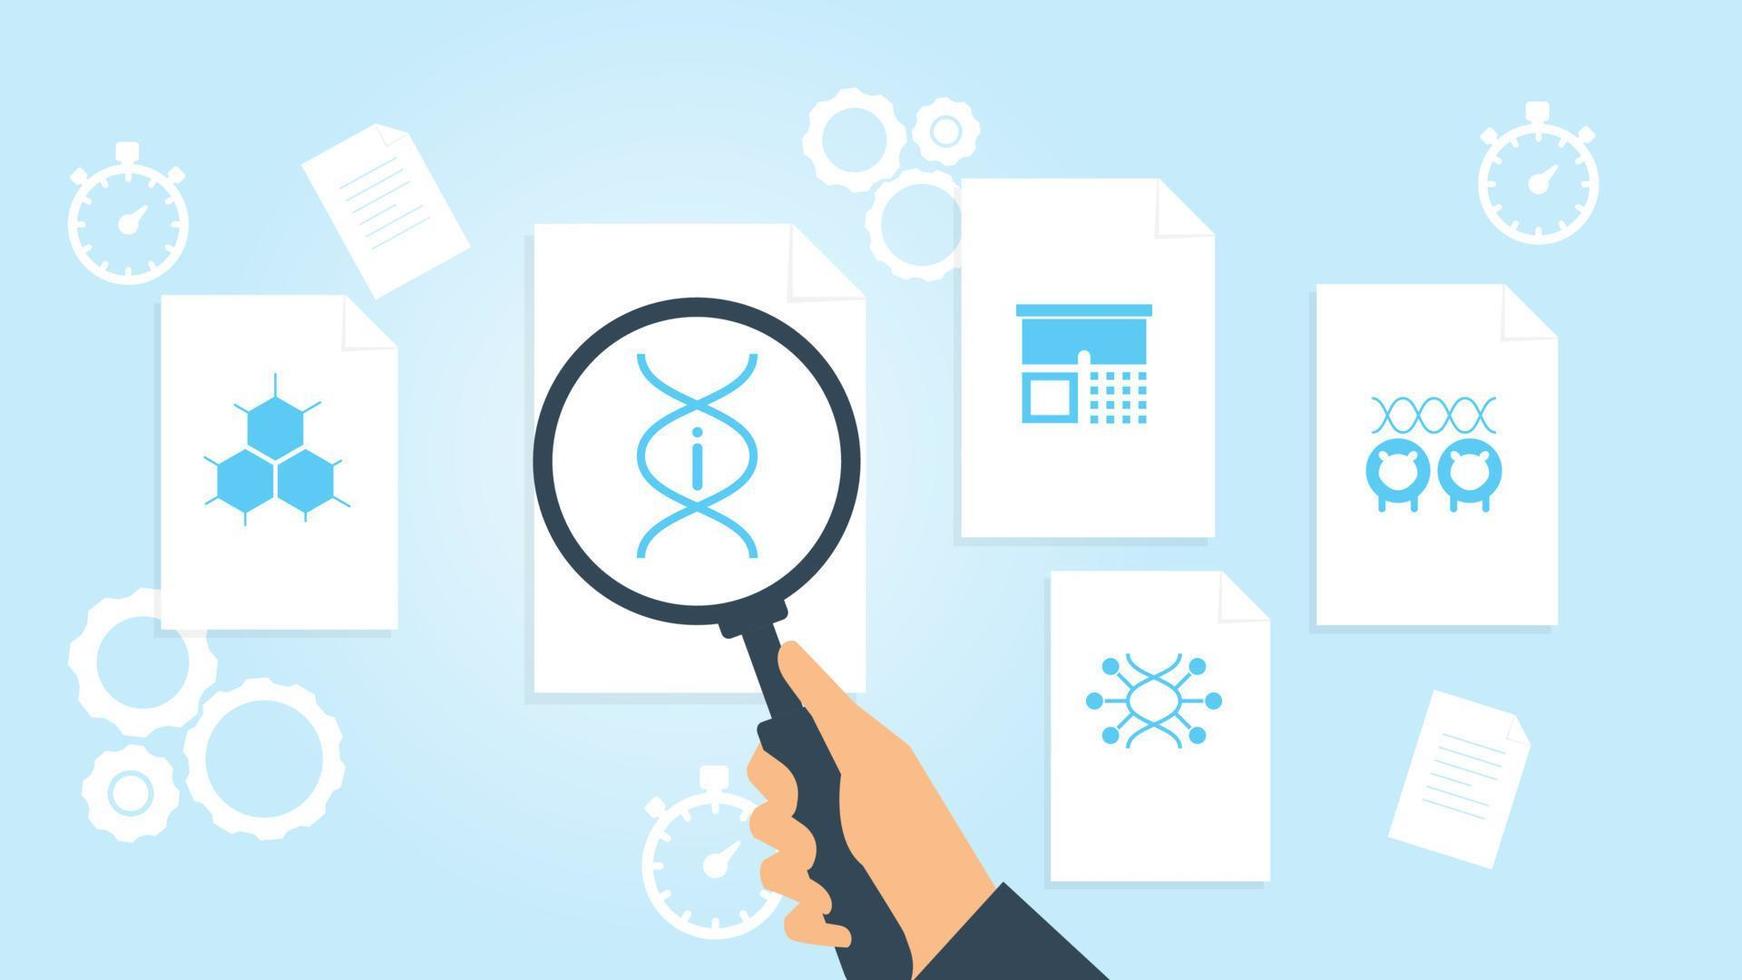 Cloning, dna, sheep file, document research vector illustration. Document with search icons. File and magnifying glass. Analytics research sign. Vector Illustration on white background